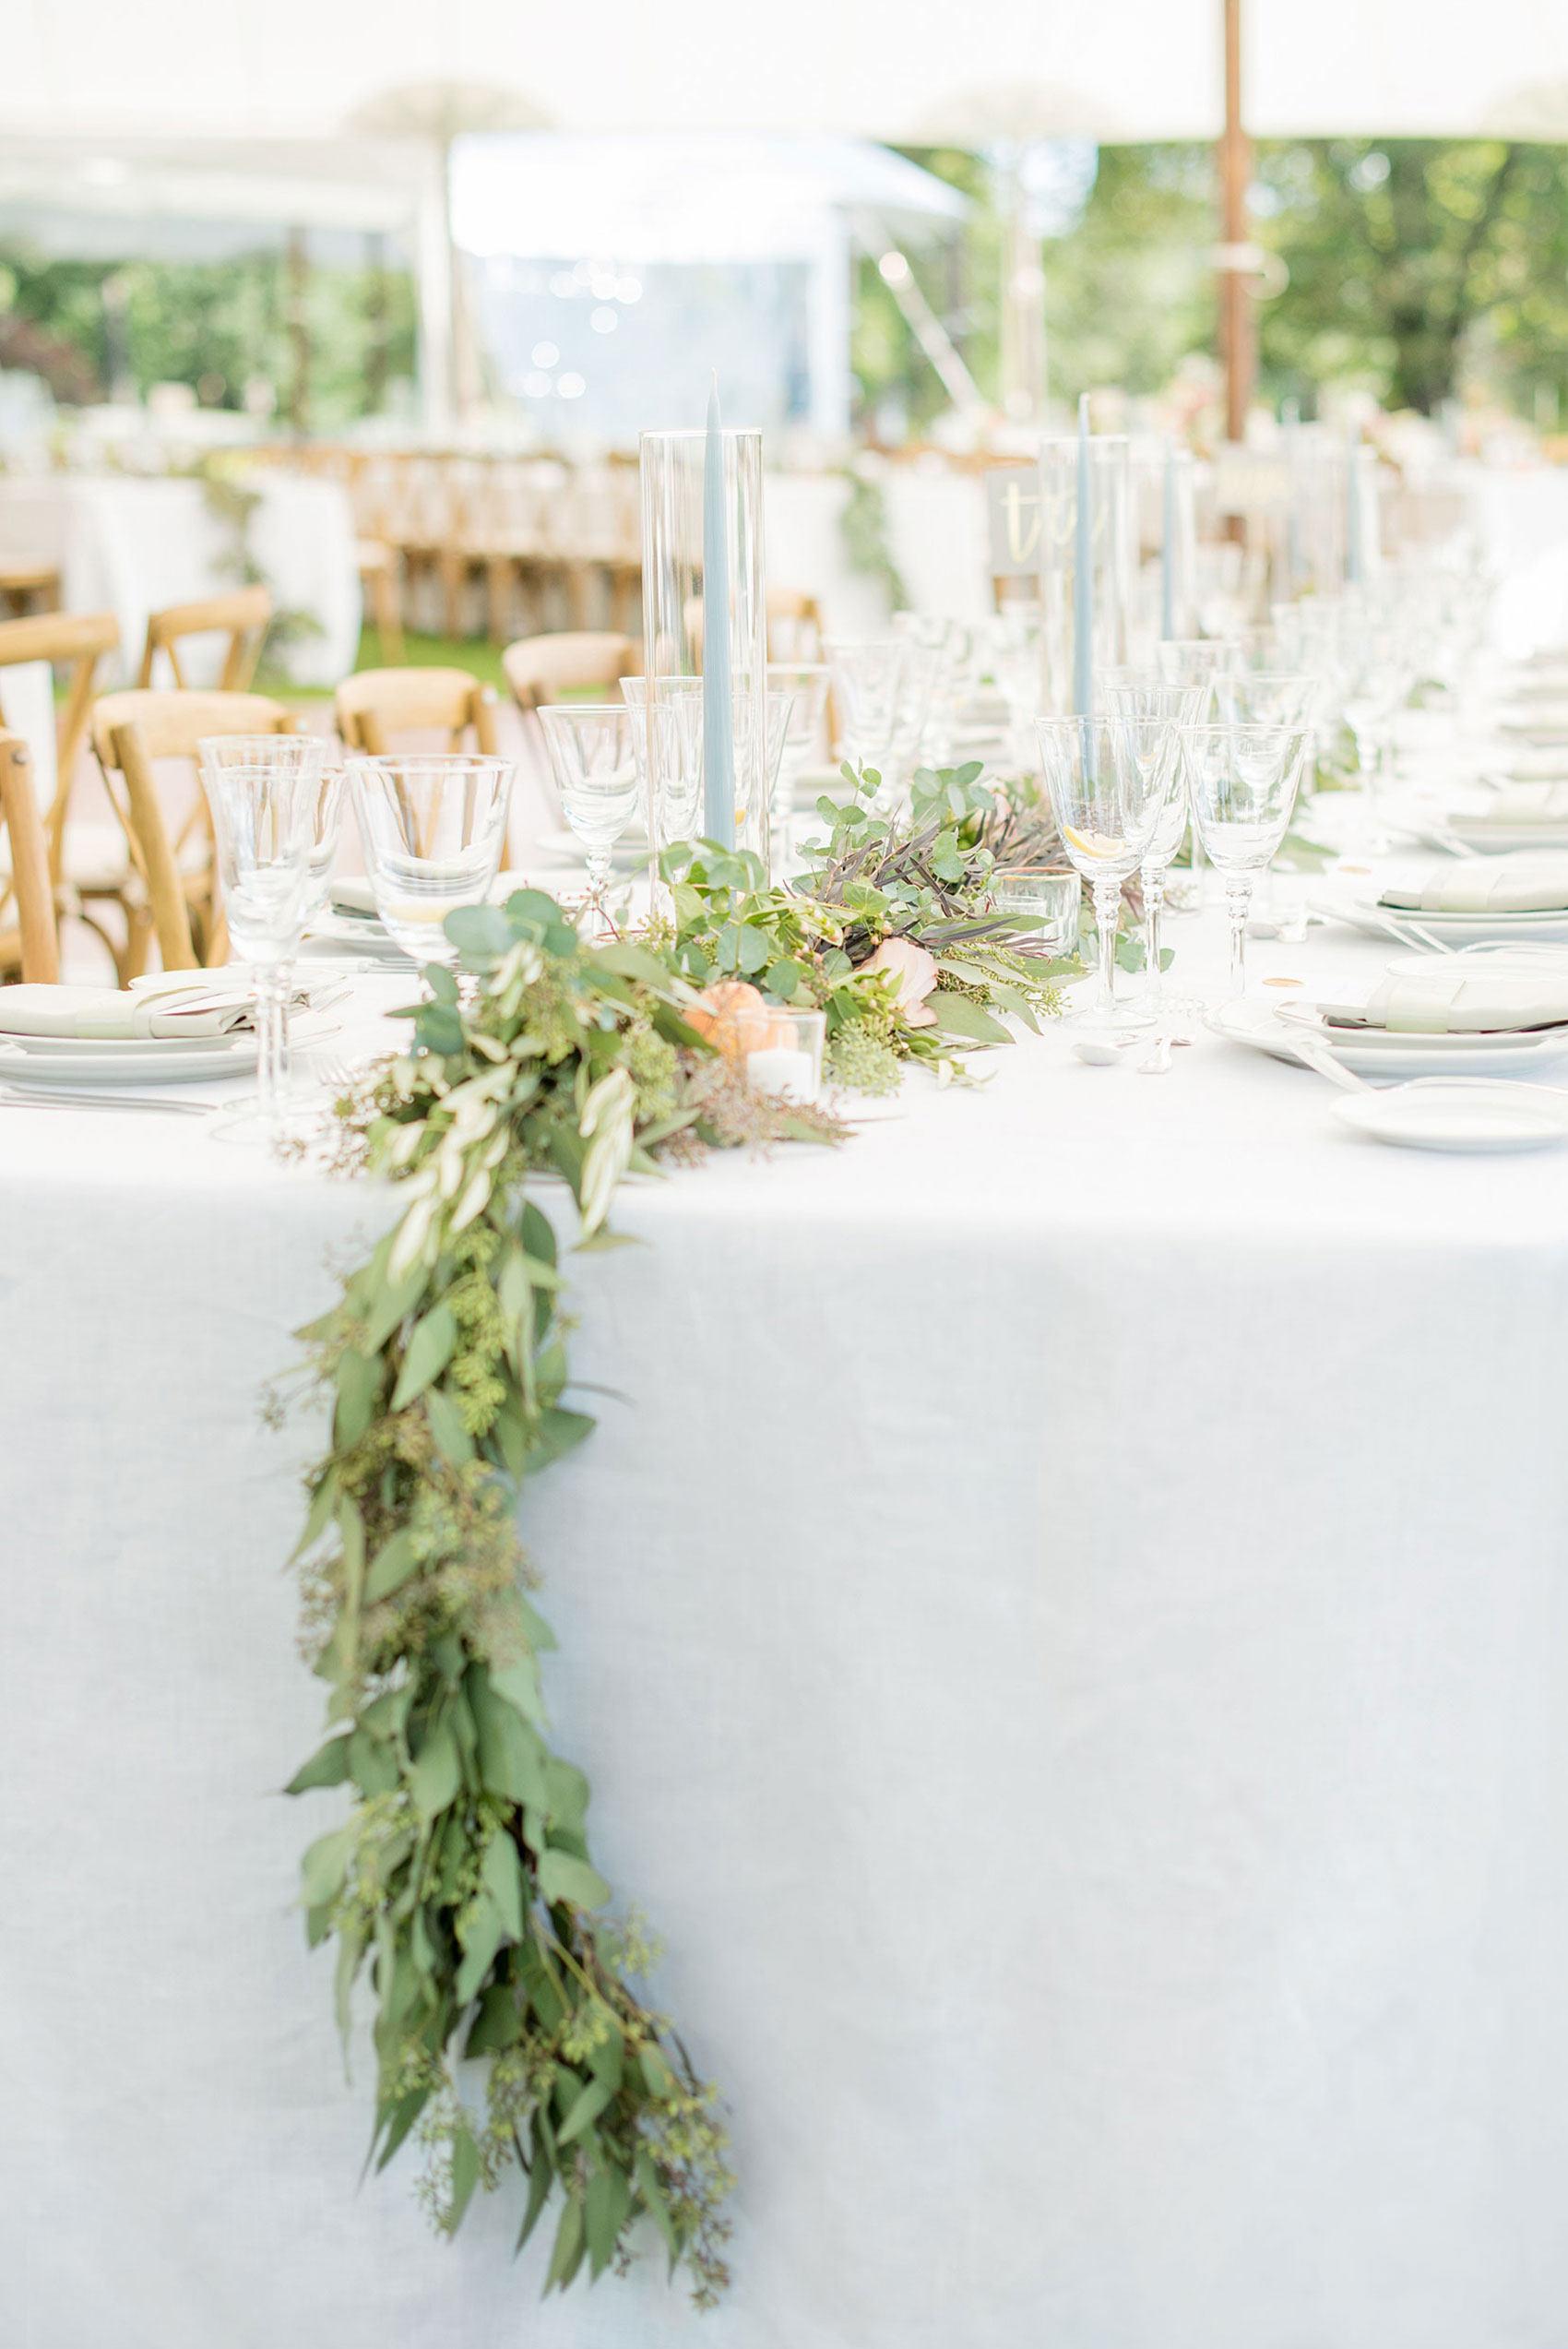 Mikkel Paige Photography photos from a Southwood Estate Wedding in Germantown, New York in the Hudson Valley. Picture of the eucalyptus garland, roses, peaches and blue tapered candles completed the tables.